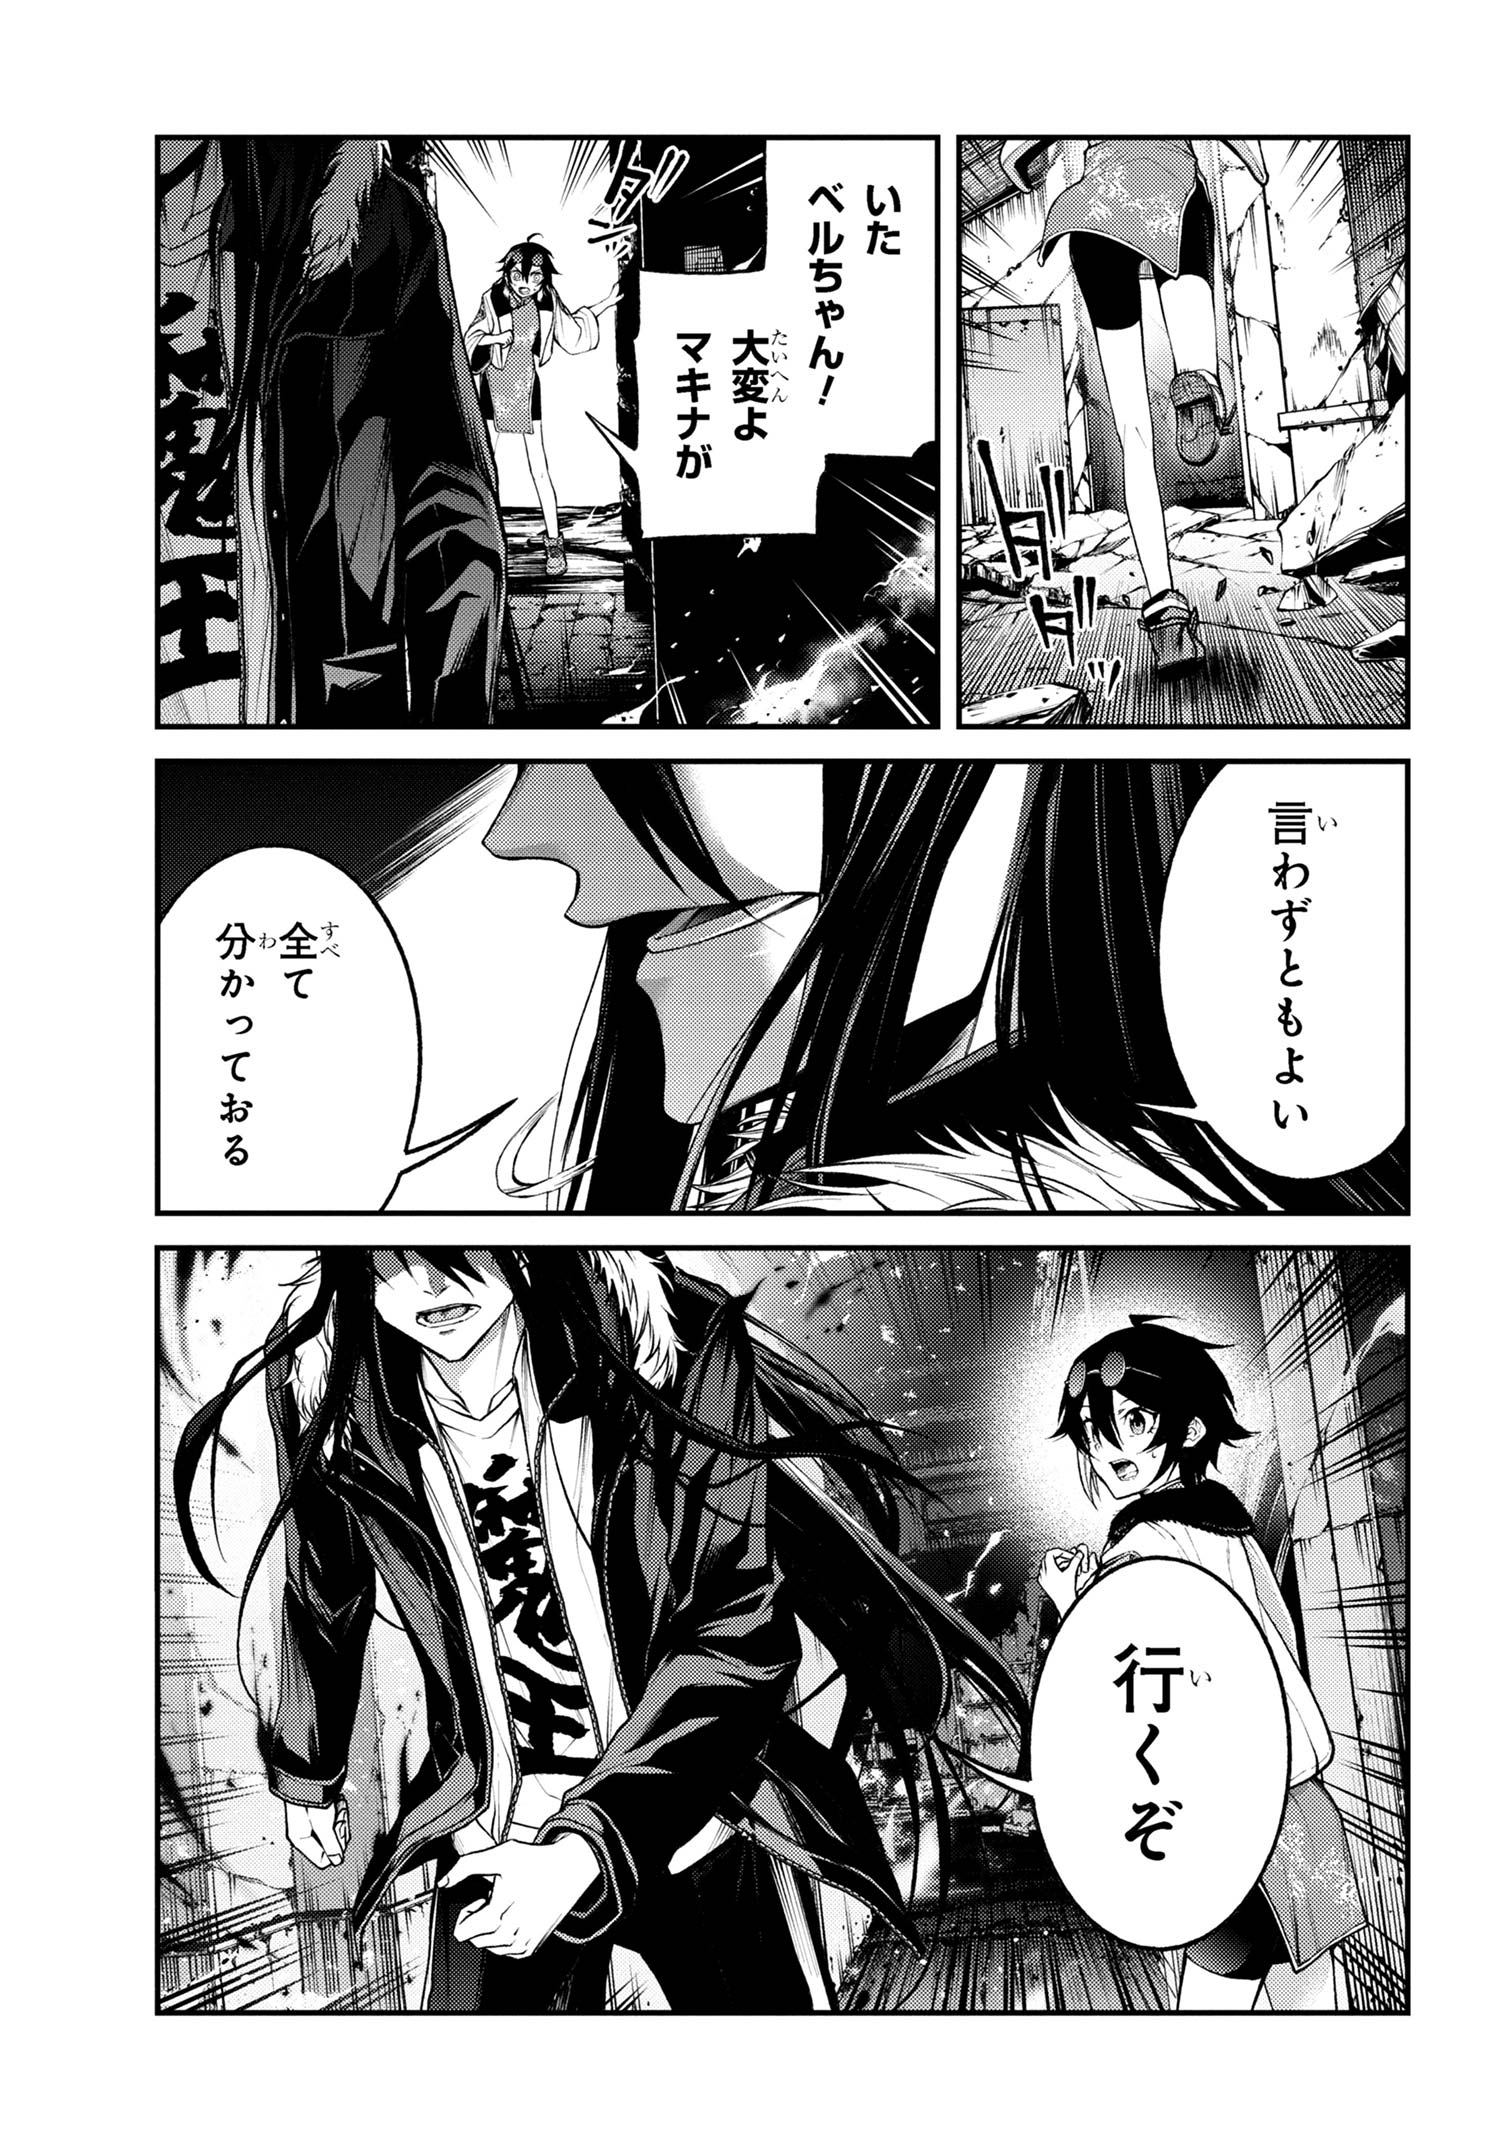 Maou 2099 - Chapter 8.3 - Page 8